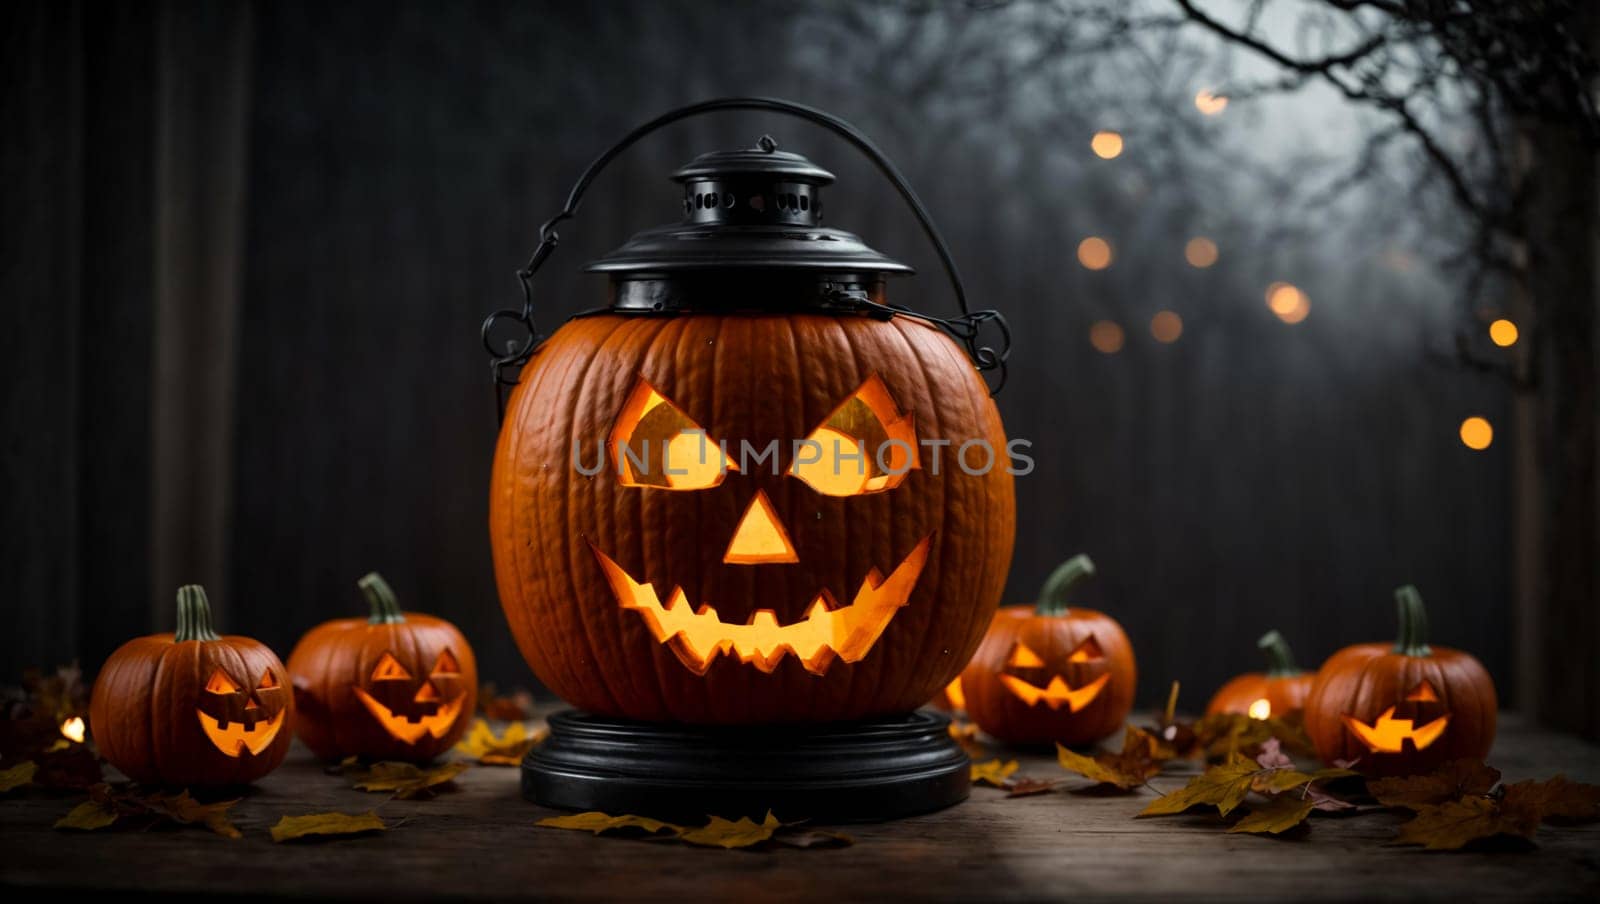 pumpkin in the form of a Halloween lantern with a creepy face on a dark background by Севостьянов